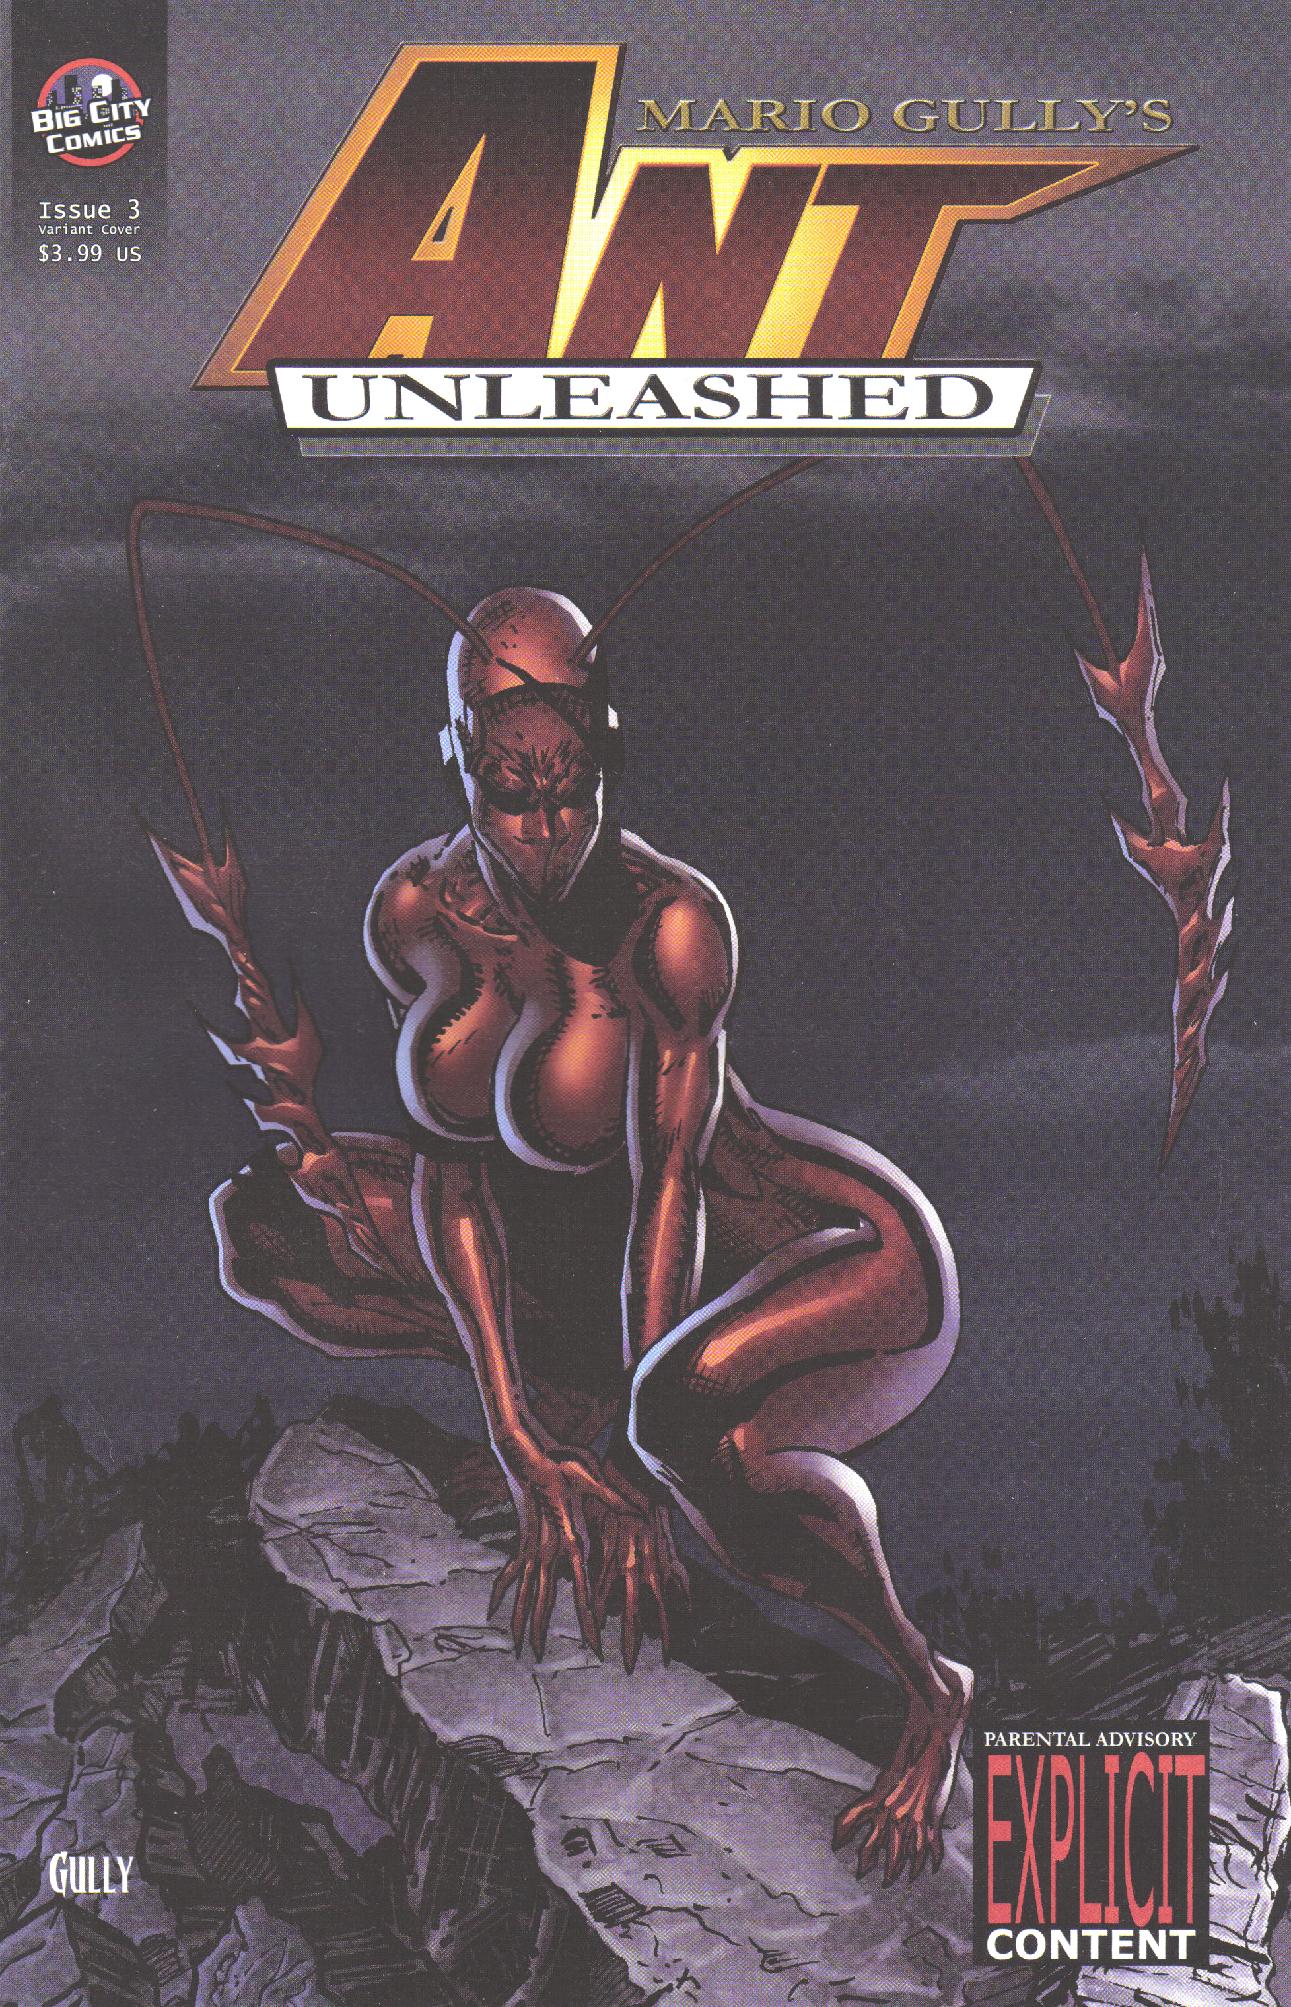 Ant Unleashed Issue 3 | Read Ant Unleashed Issue 3 comic online in high  quality. Read Full Comic online for free - Read comics online in high  quality .| READ COMIC ONLINE